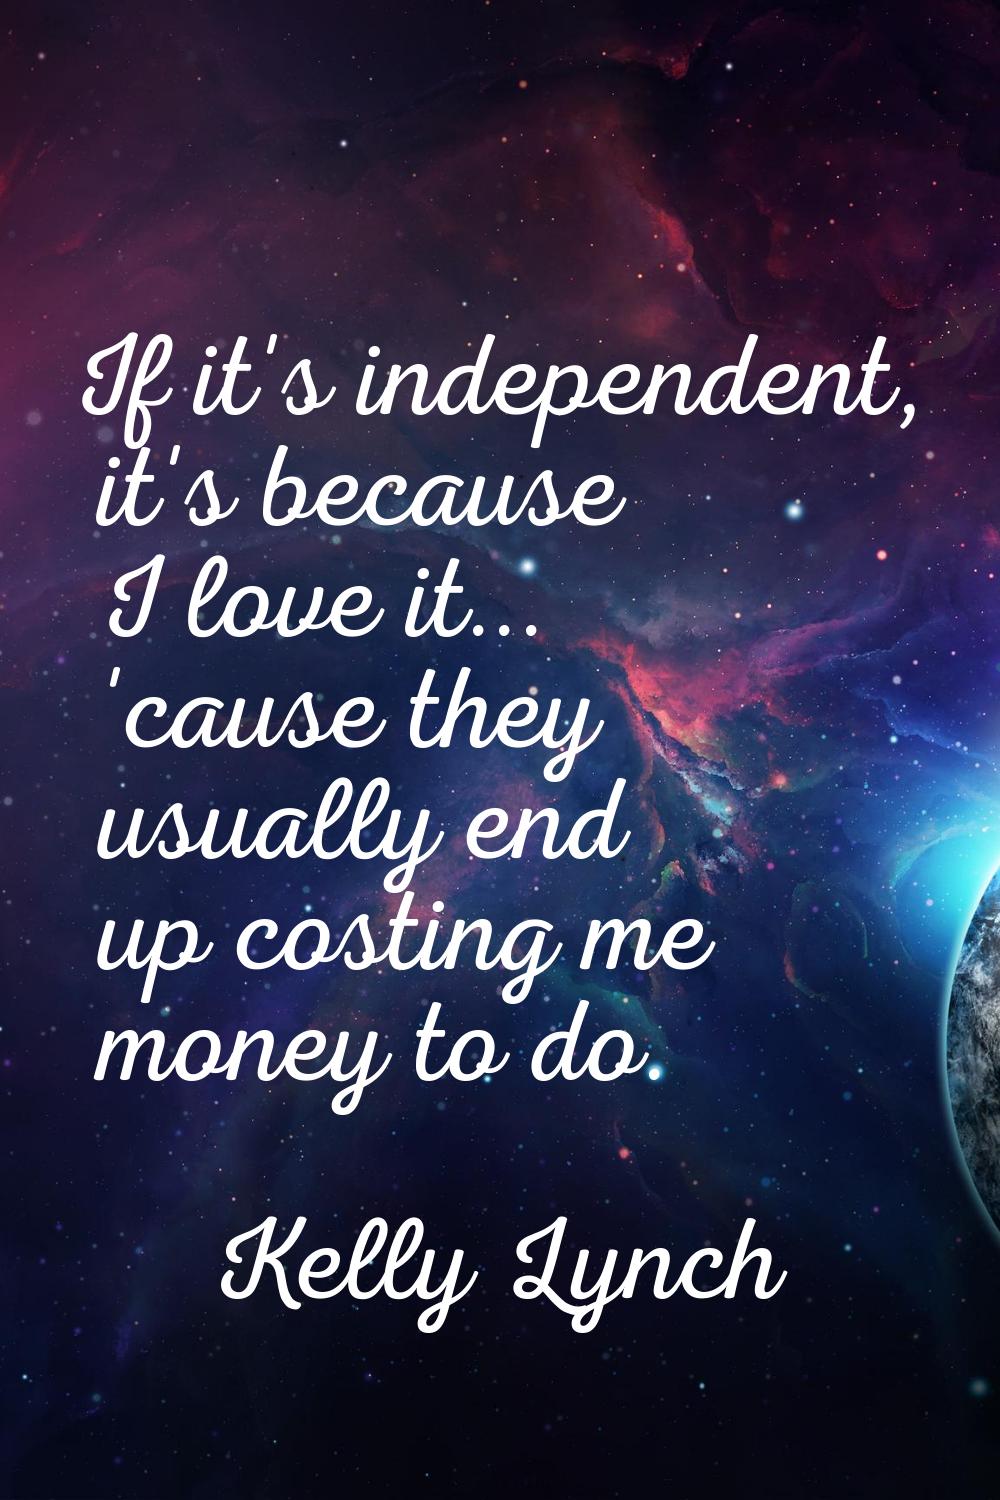 If it's independent, it's because I love it... 'cause they usually end up costing me money to do.